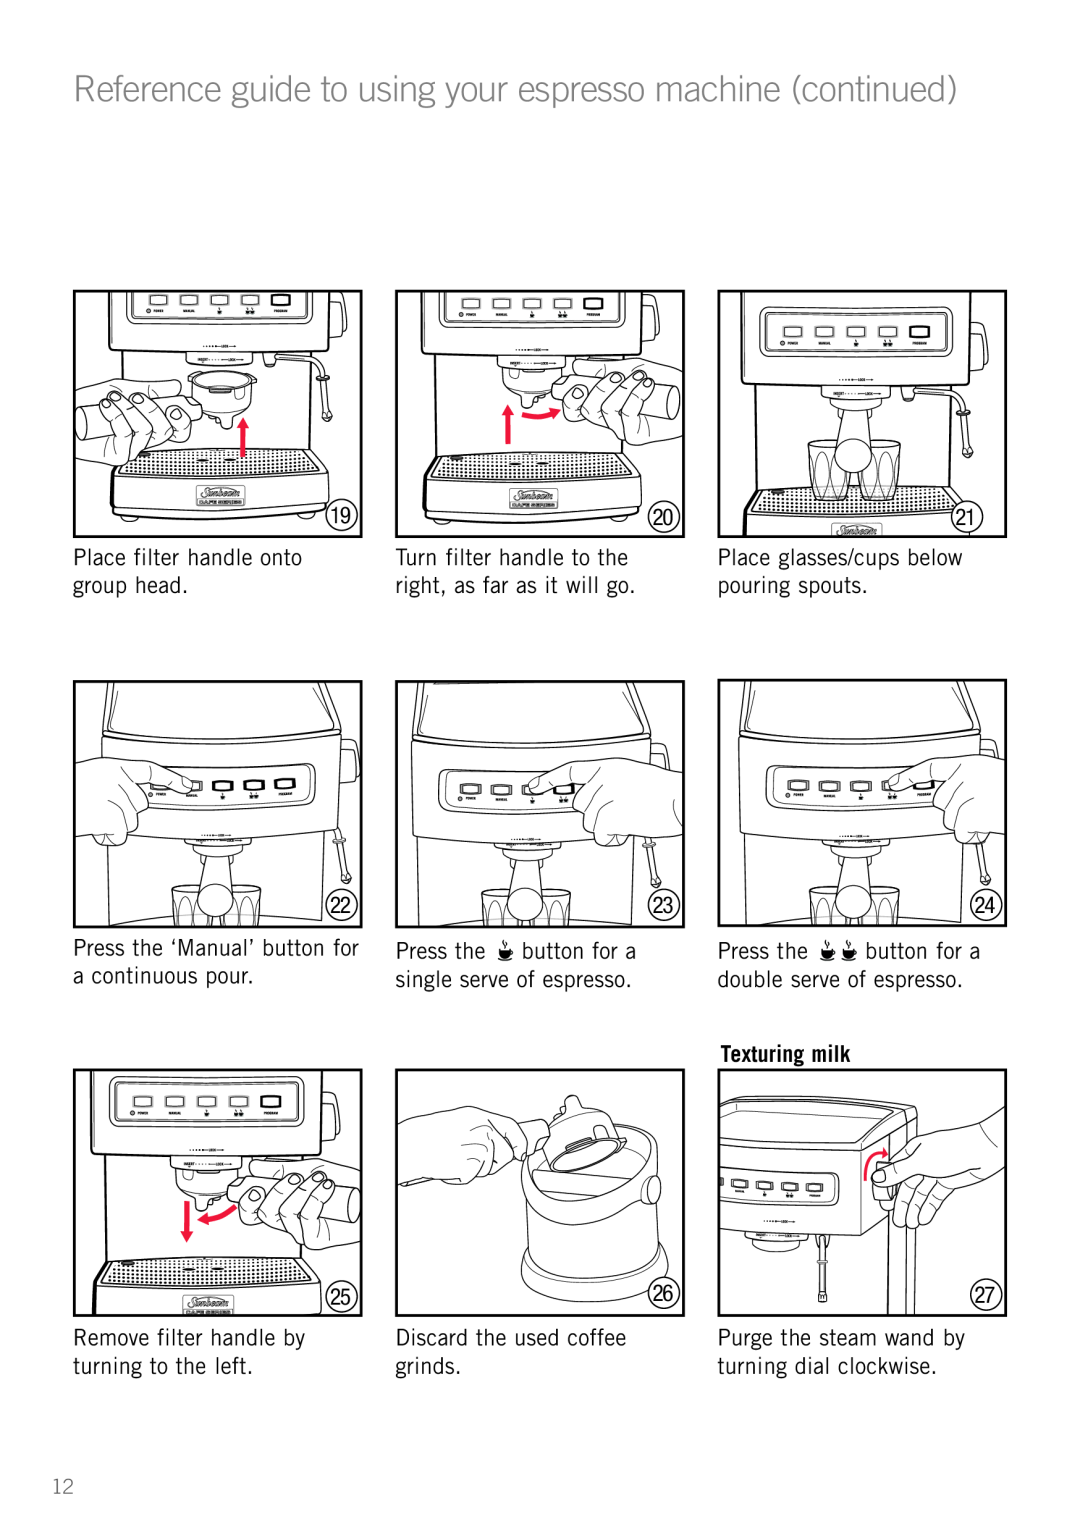 Sunbeam EM5800 manual Texturing milk, Reference guide to using your espresso machine continued 